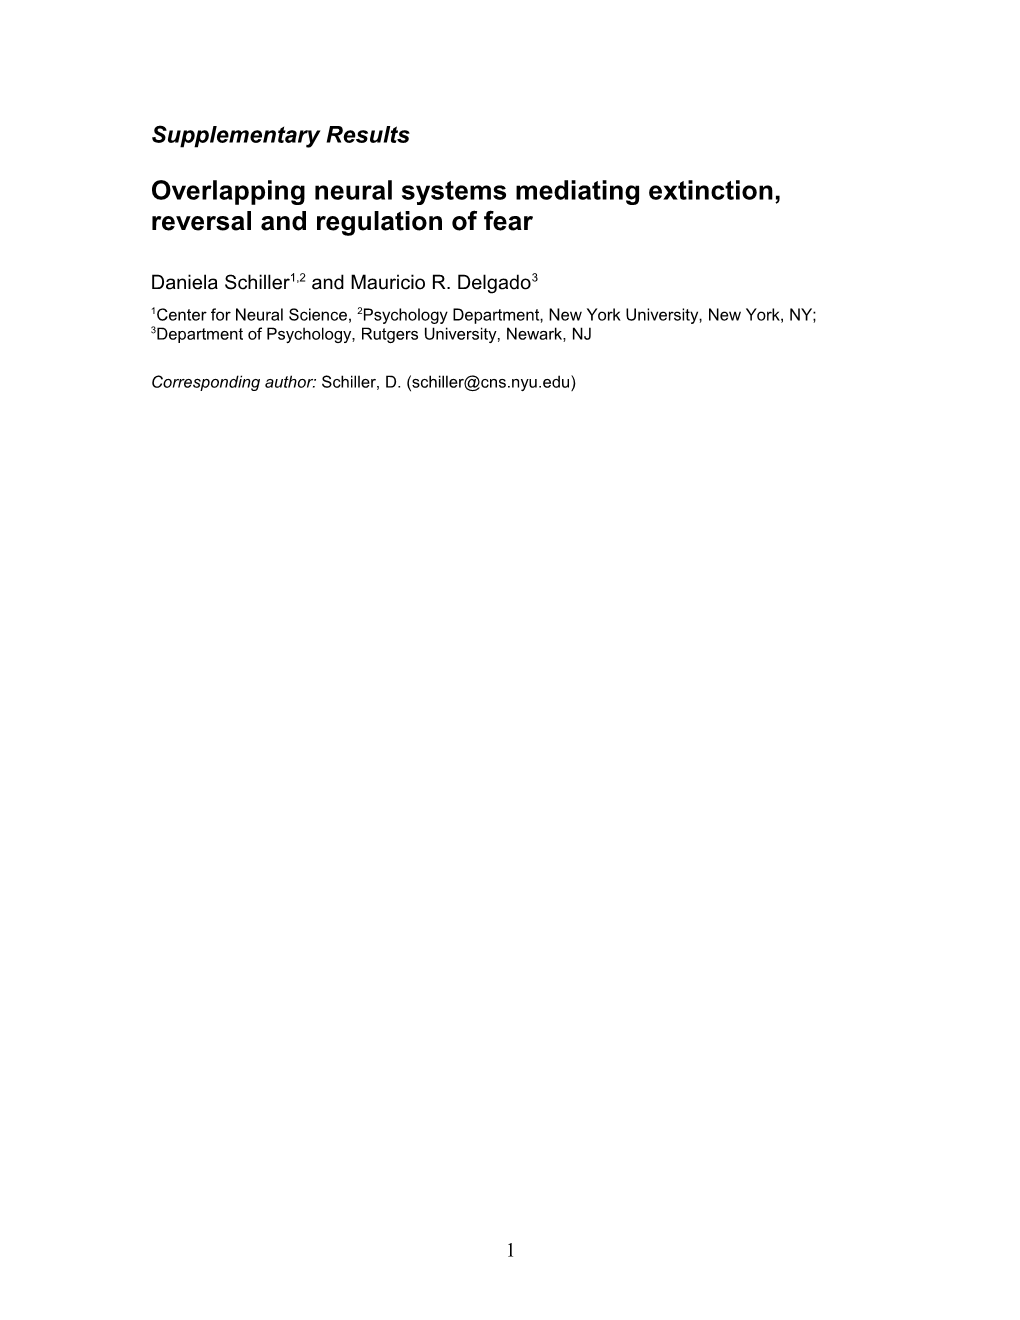 Overlapping Neural Systems Mediating Extinction, Reversal and Regulation of Fear